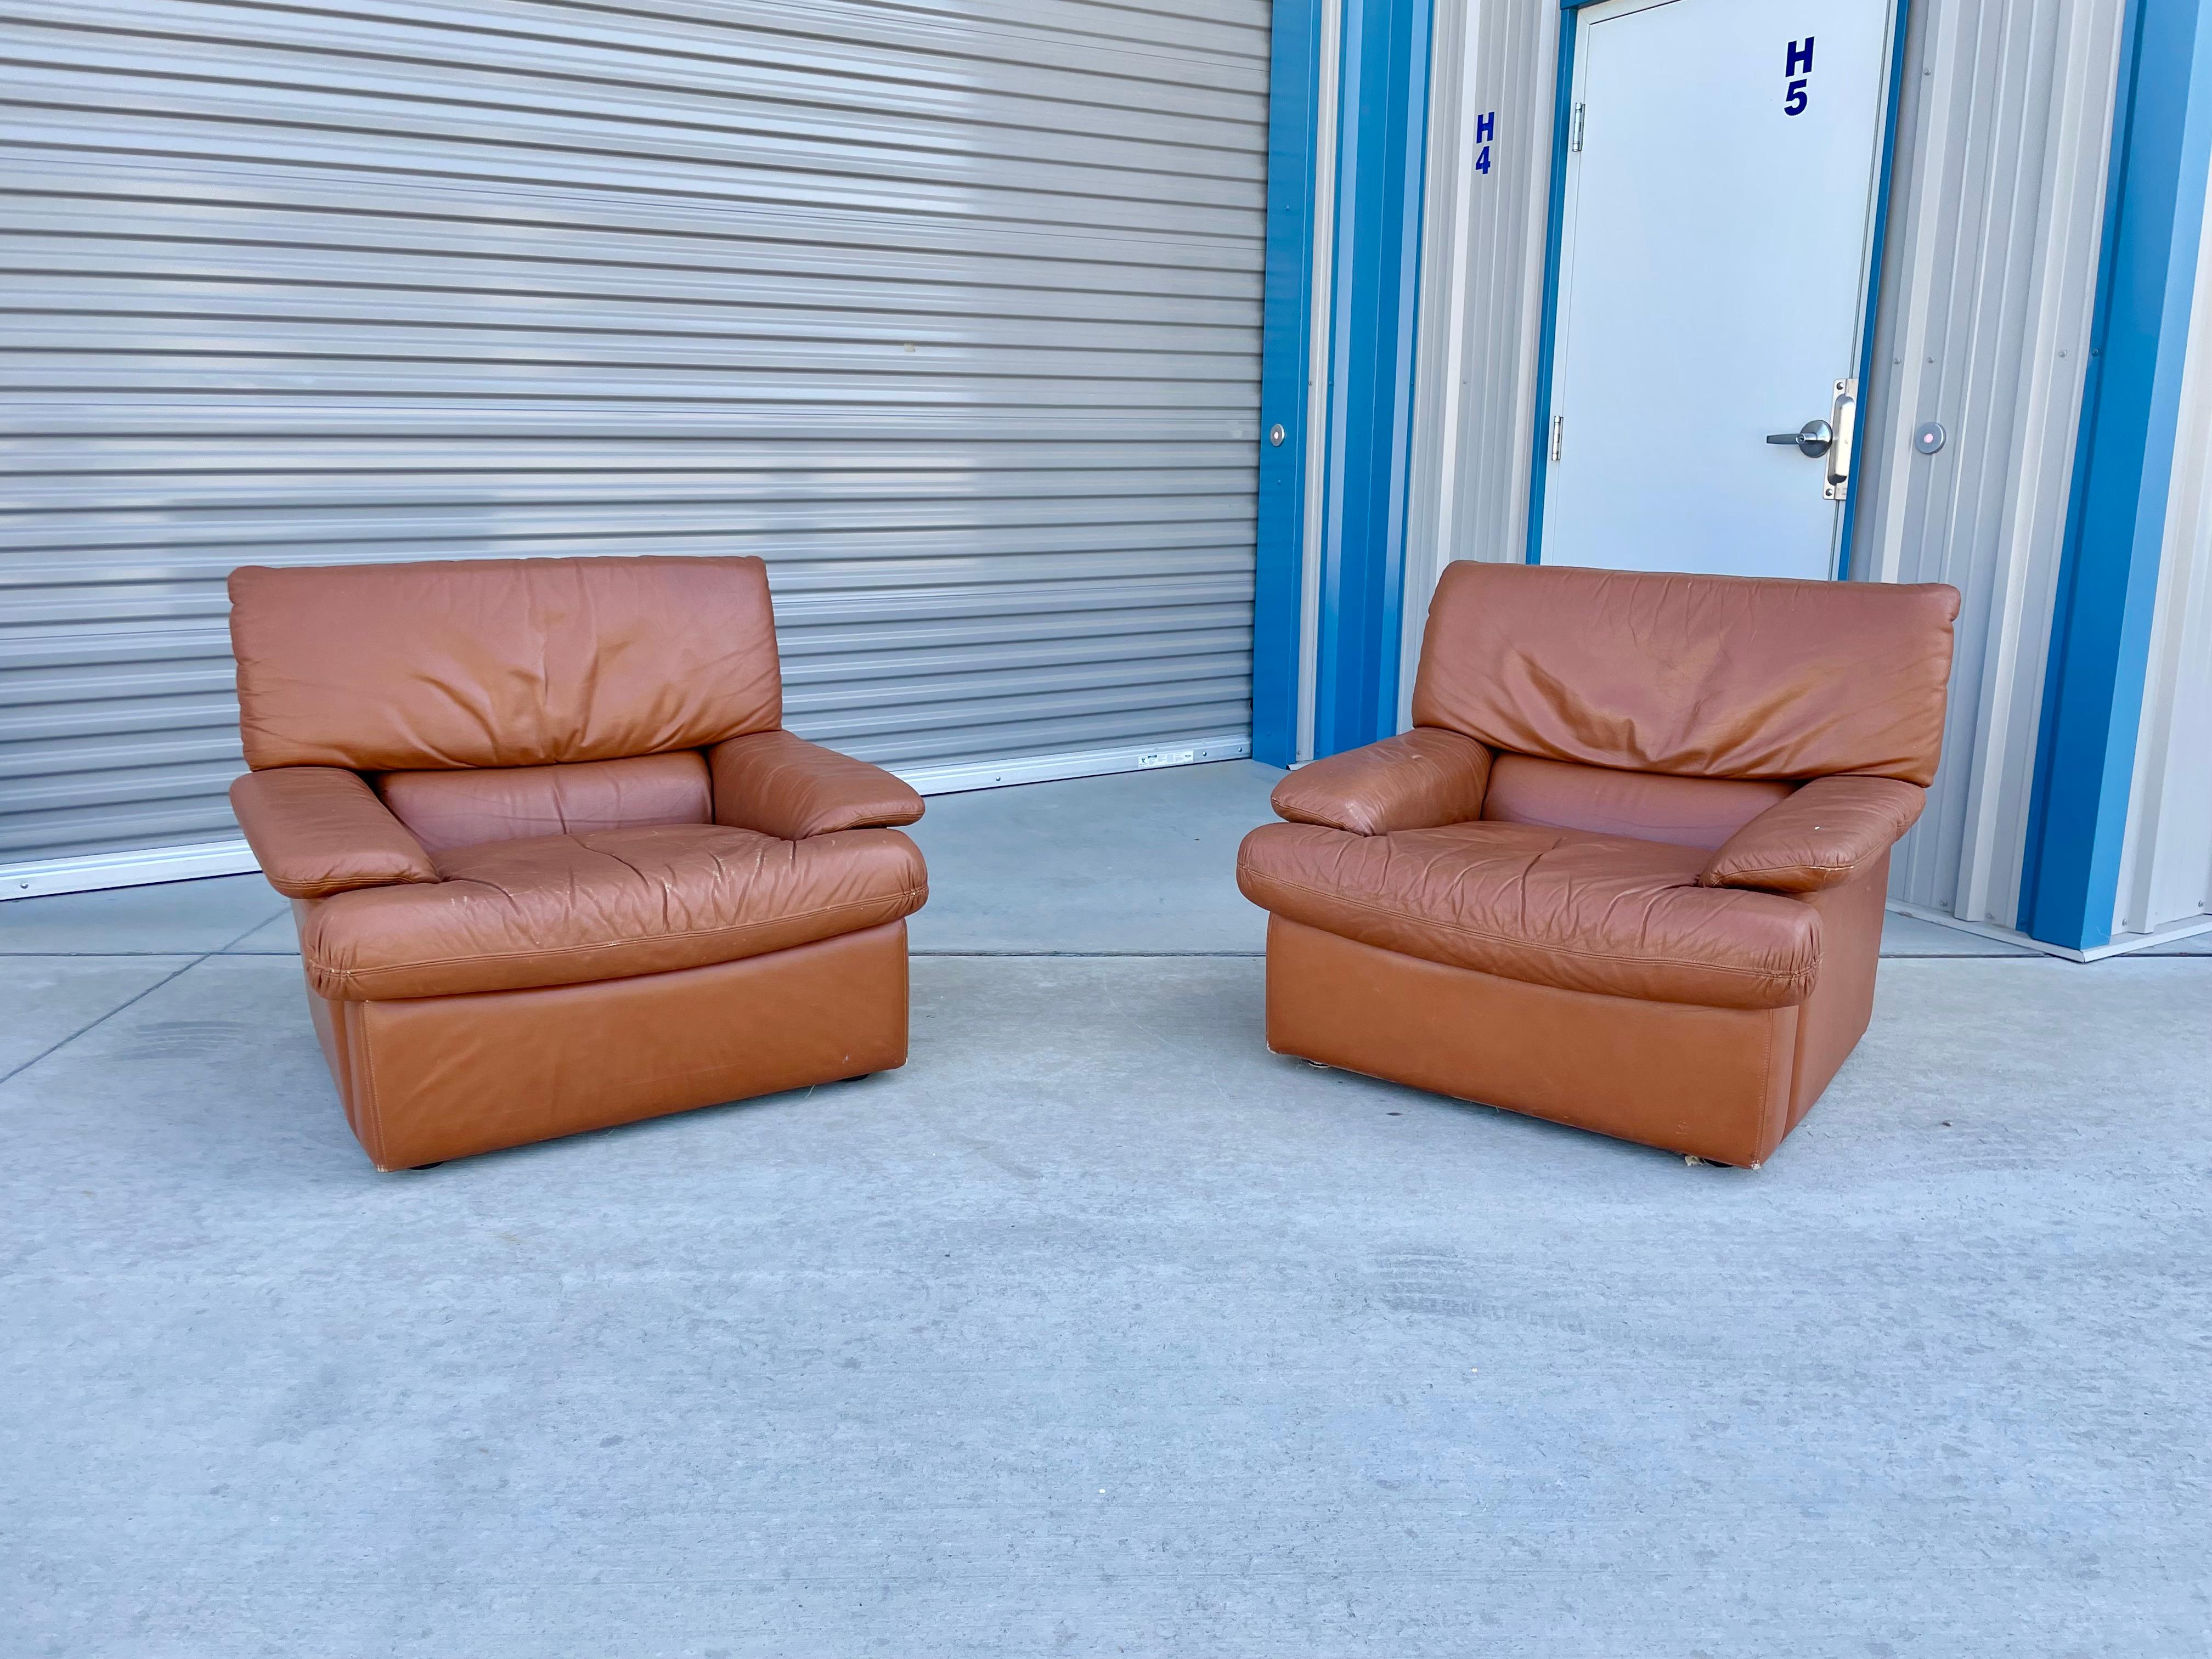 Vintage leather lounge chairs styled after De Sede and manufactured in Italy circa, 1970s. These lounge chairs, given to there size, are a perfect pair for your living room space. The chairs also has an orange leather upholstery giving them that